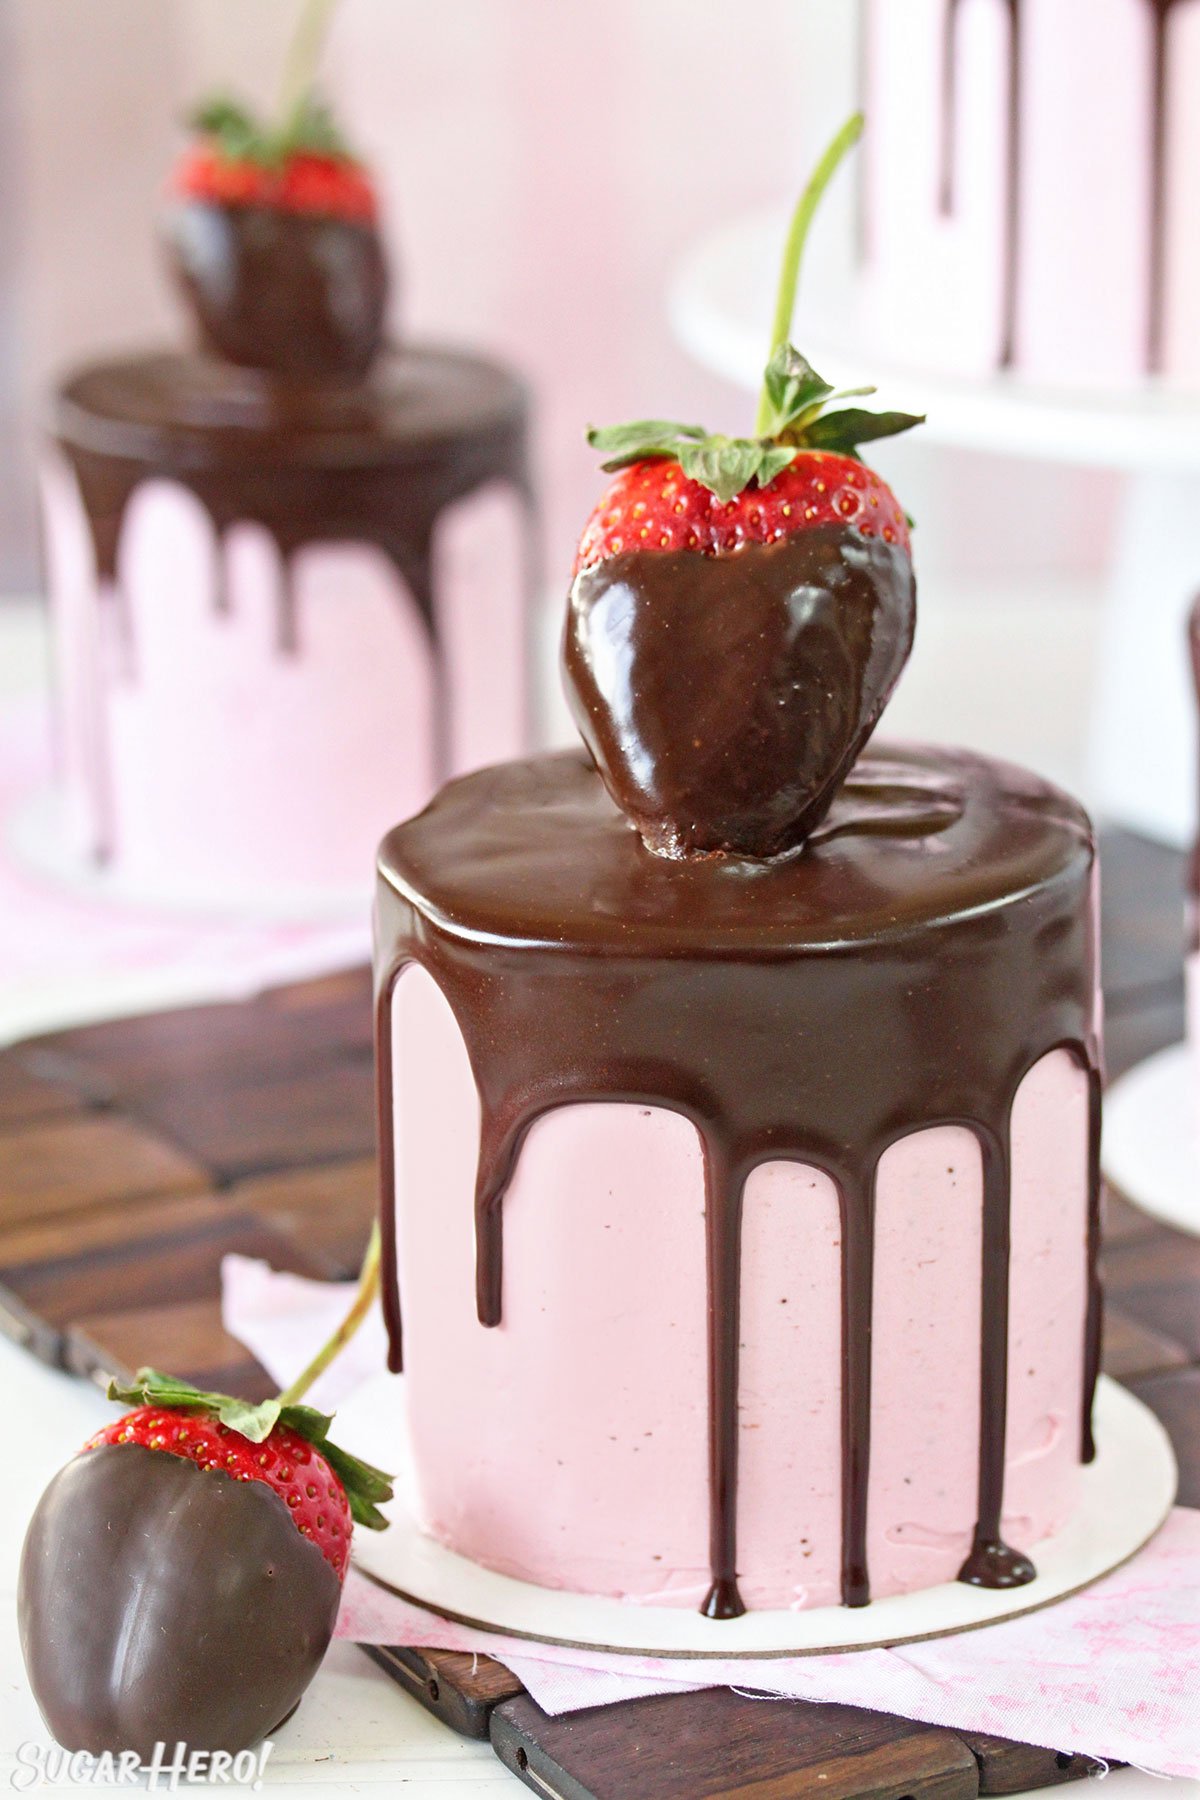 Chocolate-Covered Strawberry Cakes - A single cake displayed with a chocolate strawberry on the top and one to the side. | From SugarHero.com